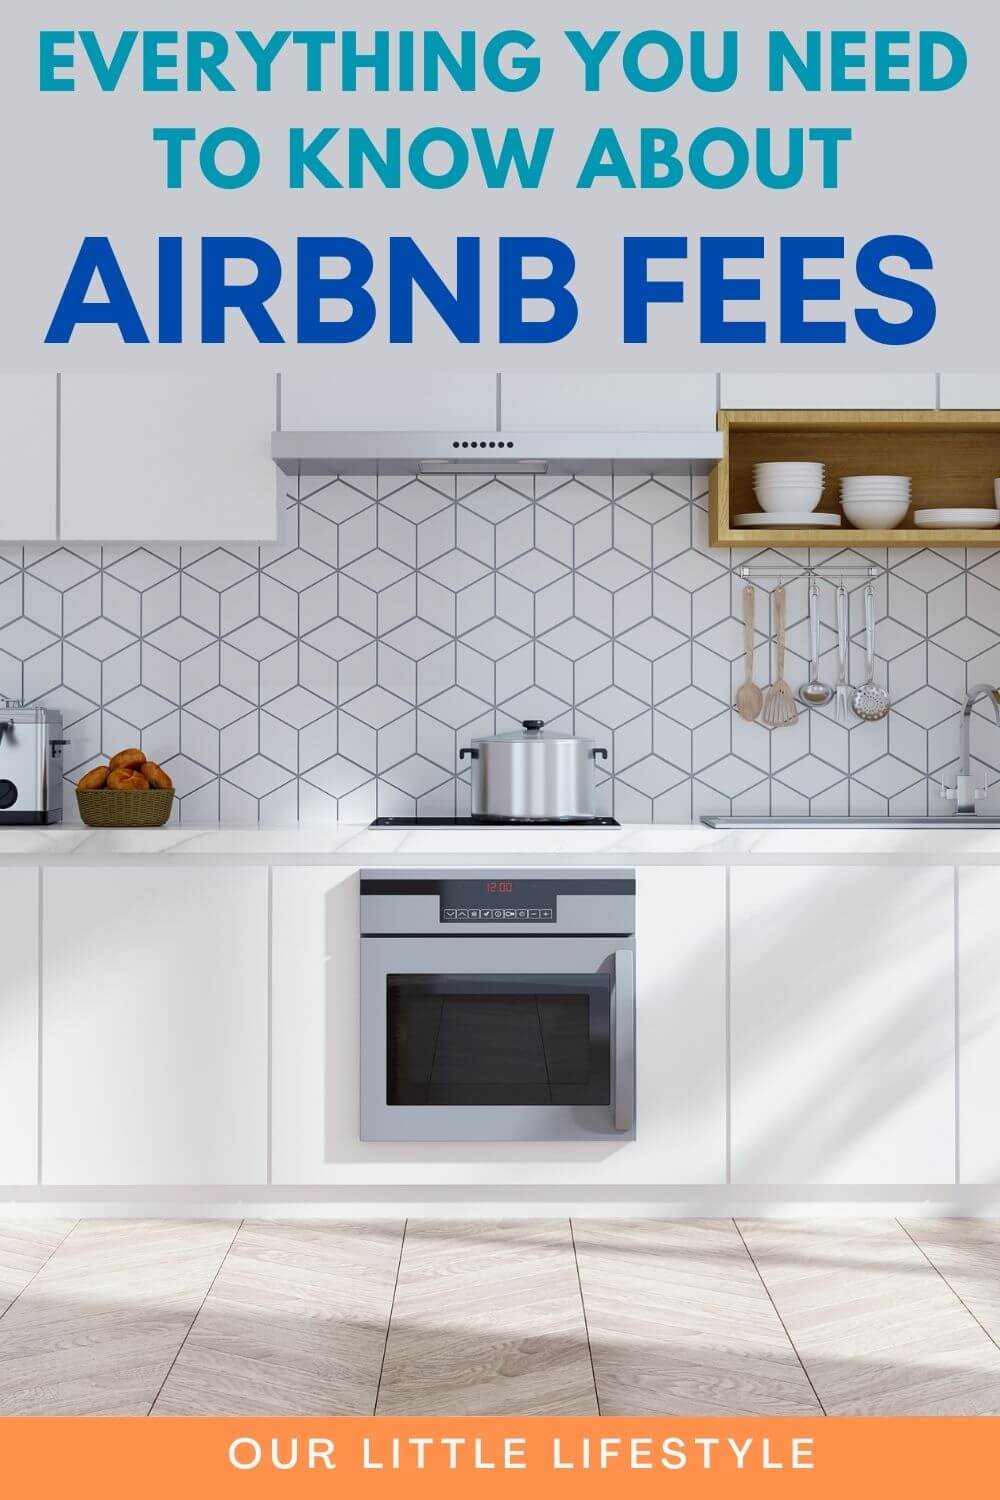 Everything you need to know about Airbnb fees